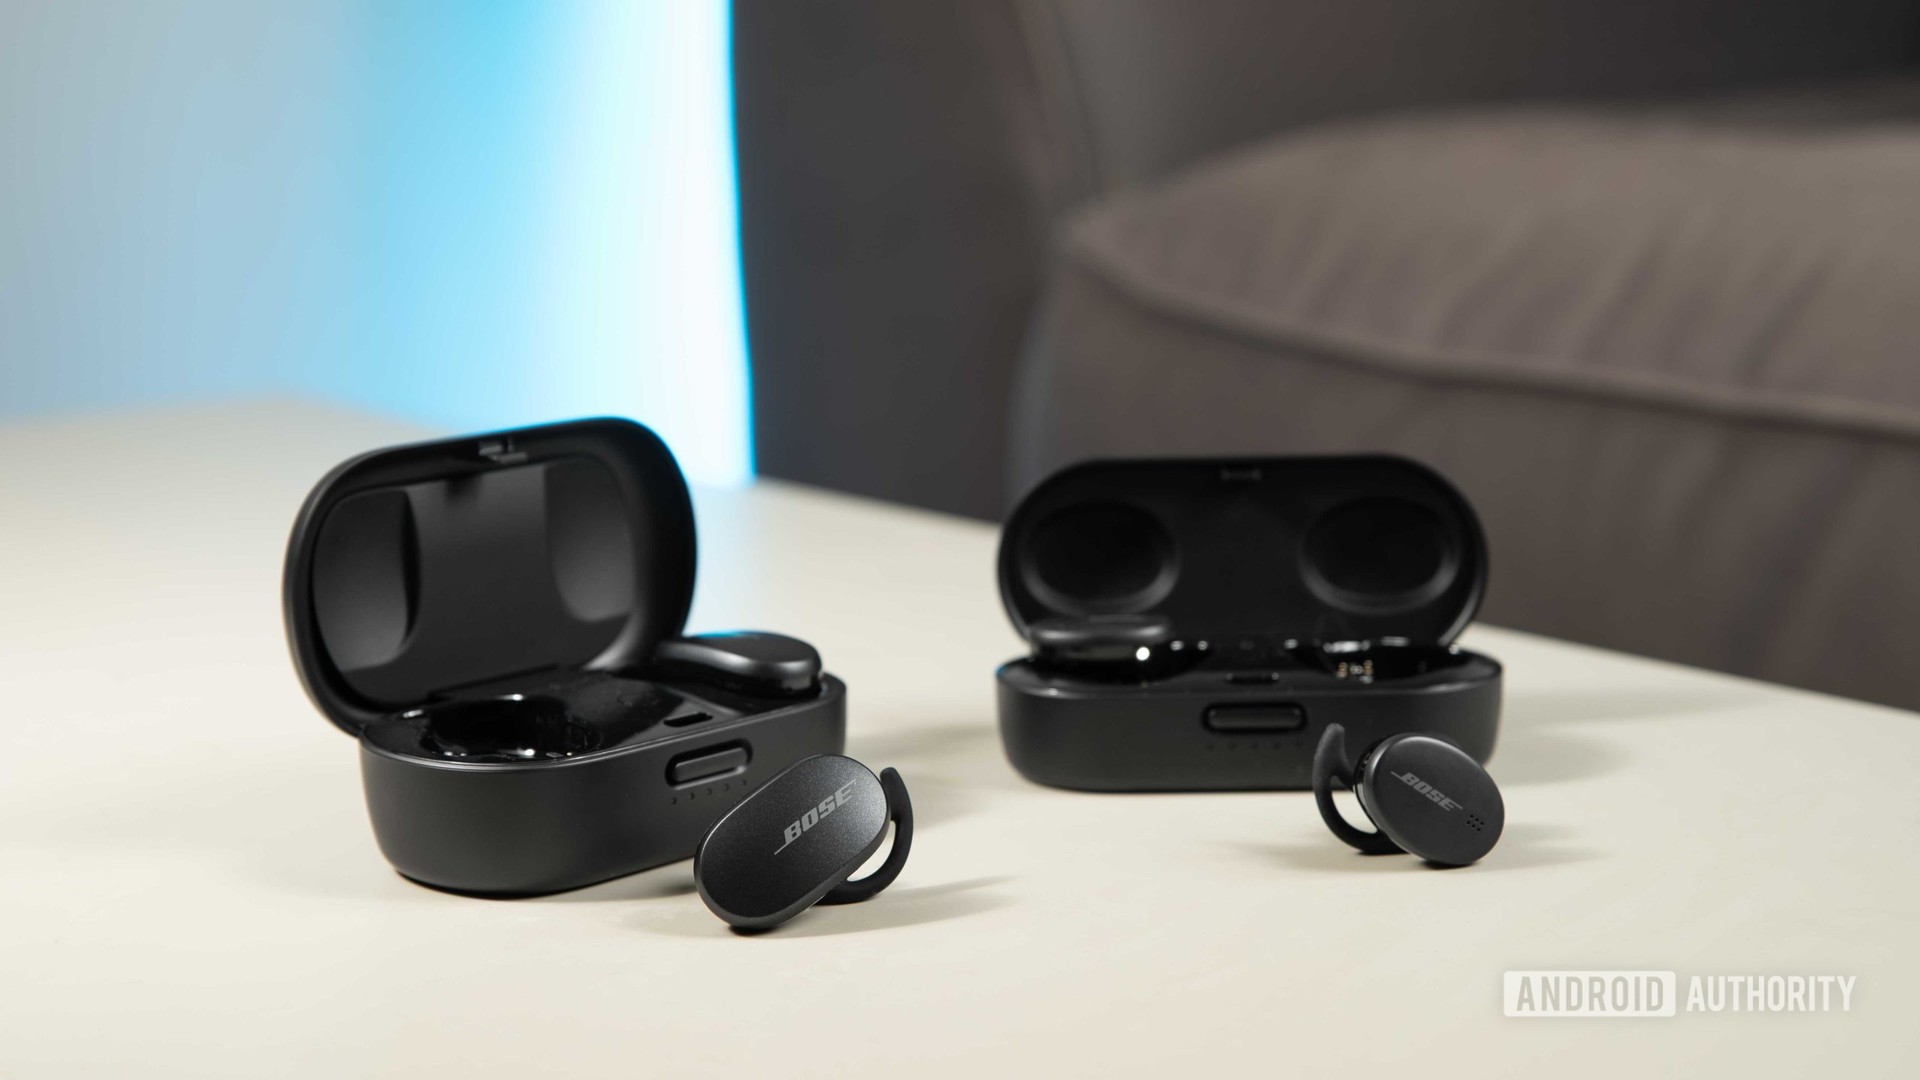 The Bose QuietComfort Earbuds noise cancelling true wireless earbuds next to the Bose Sport Earbuds for a size comparison.